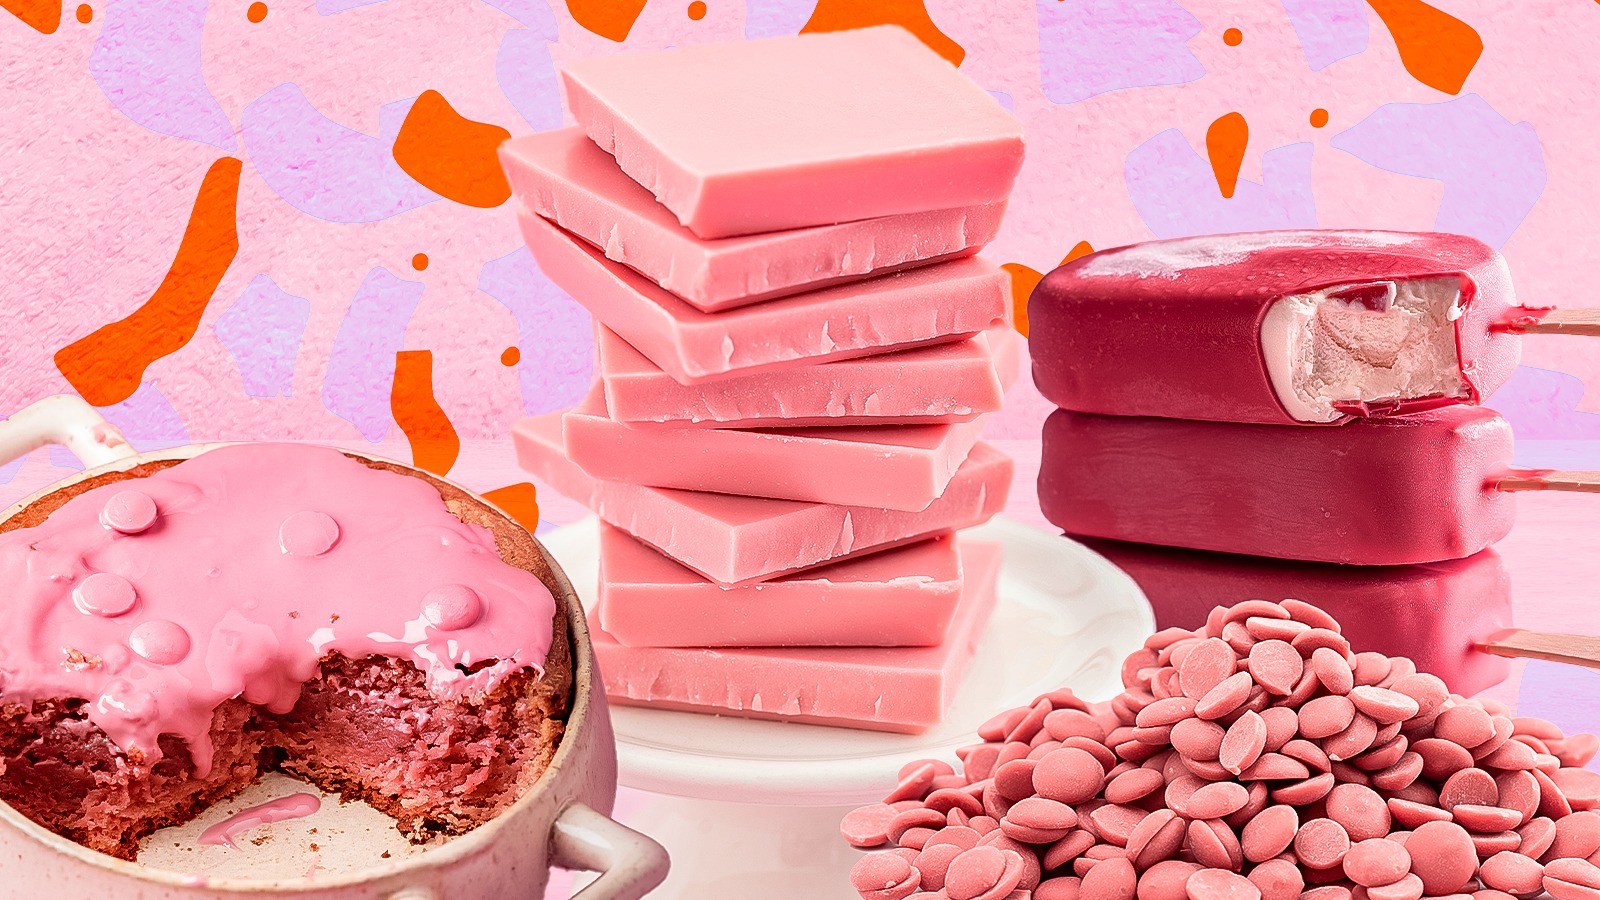 What is ruby chocolate? How is it made and why is it pink?